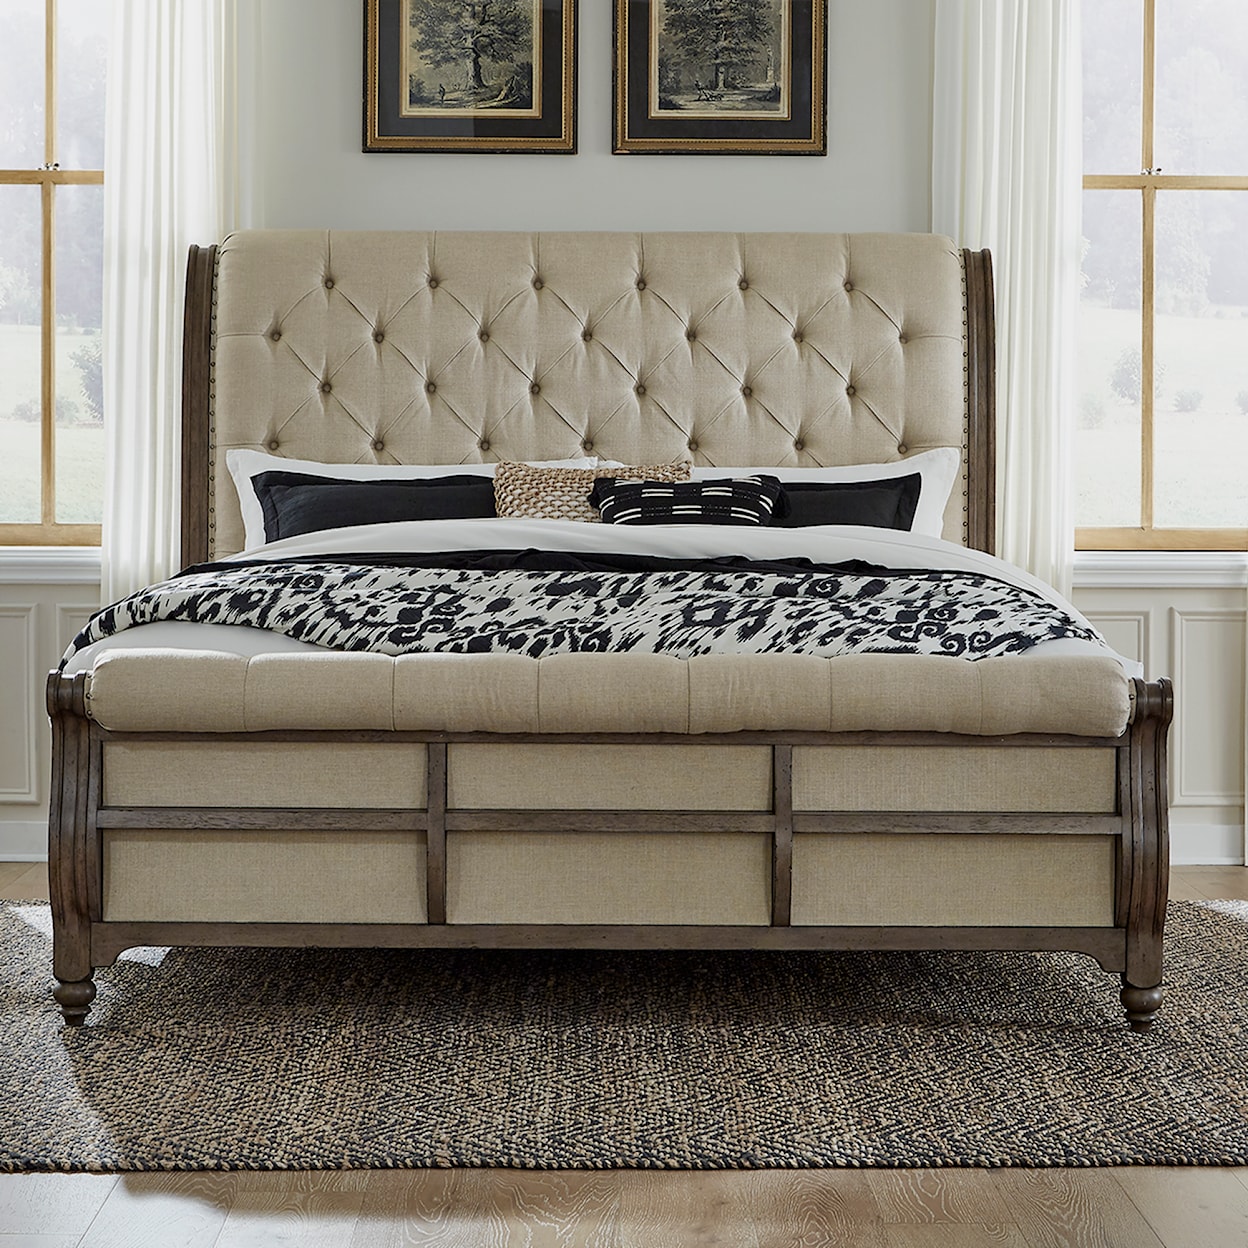 Libby Americana Farmhouse Upholstered King Sleigh Bed